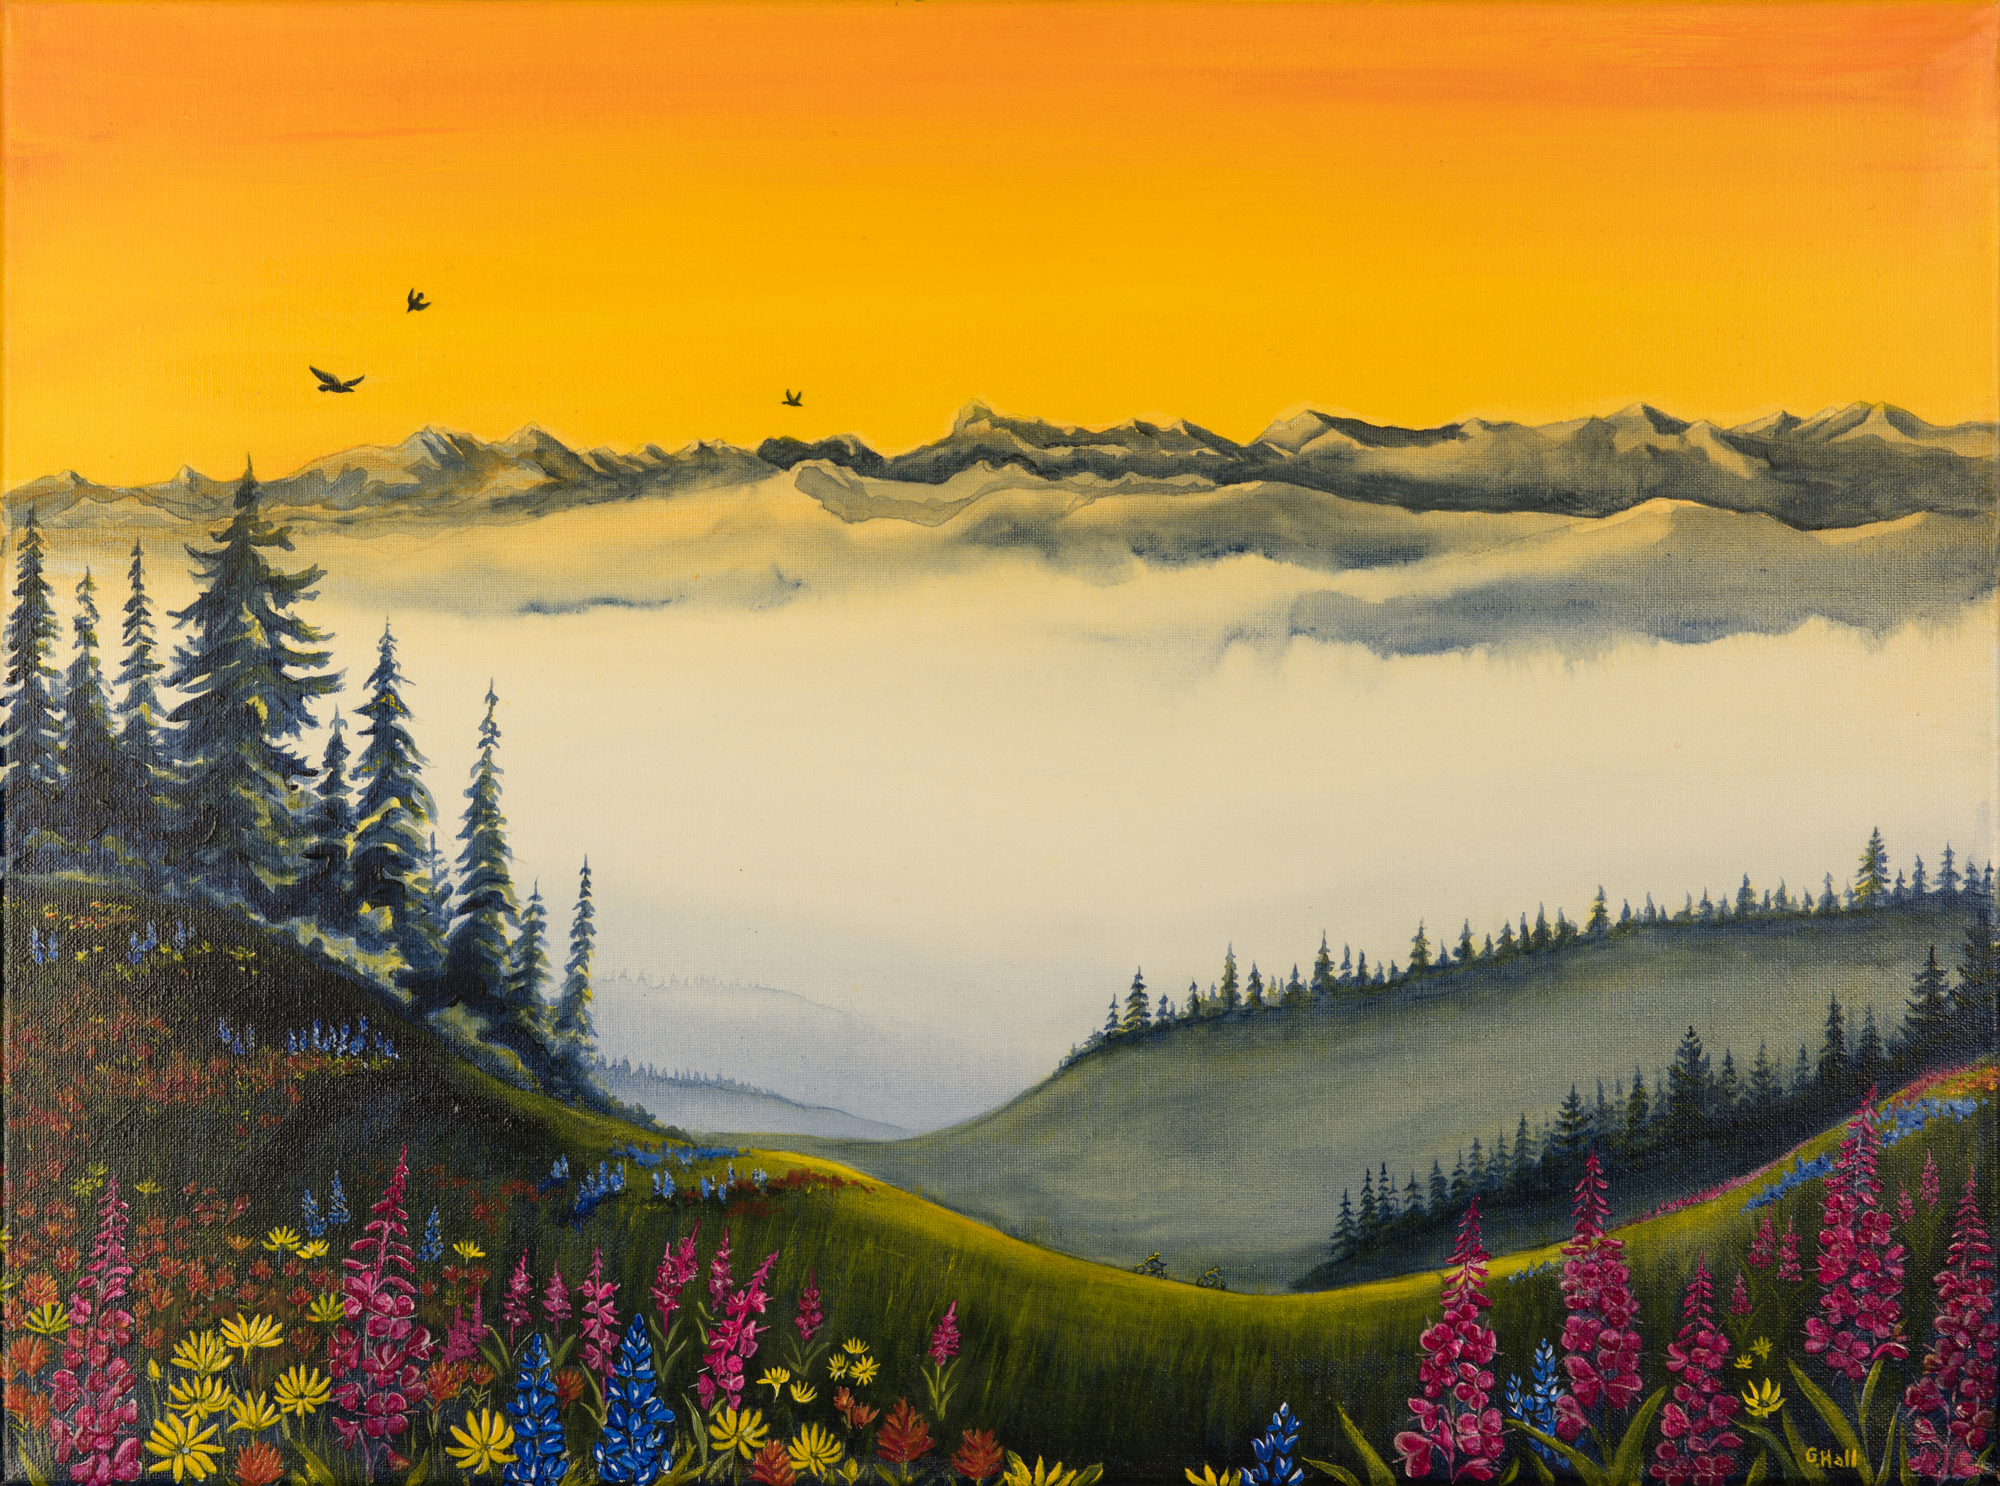 A painting by Ginny Hall depicting a colourful landscape.